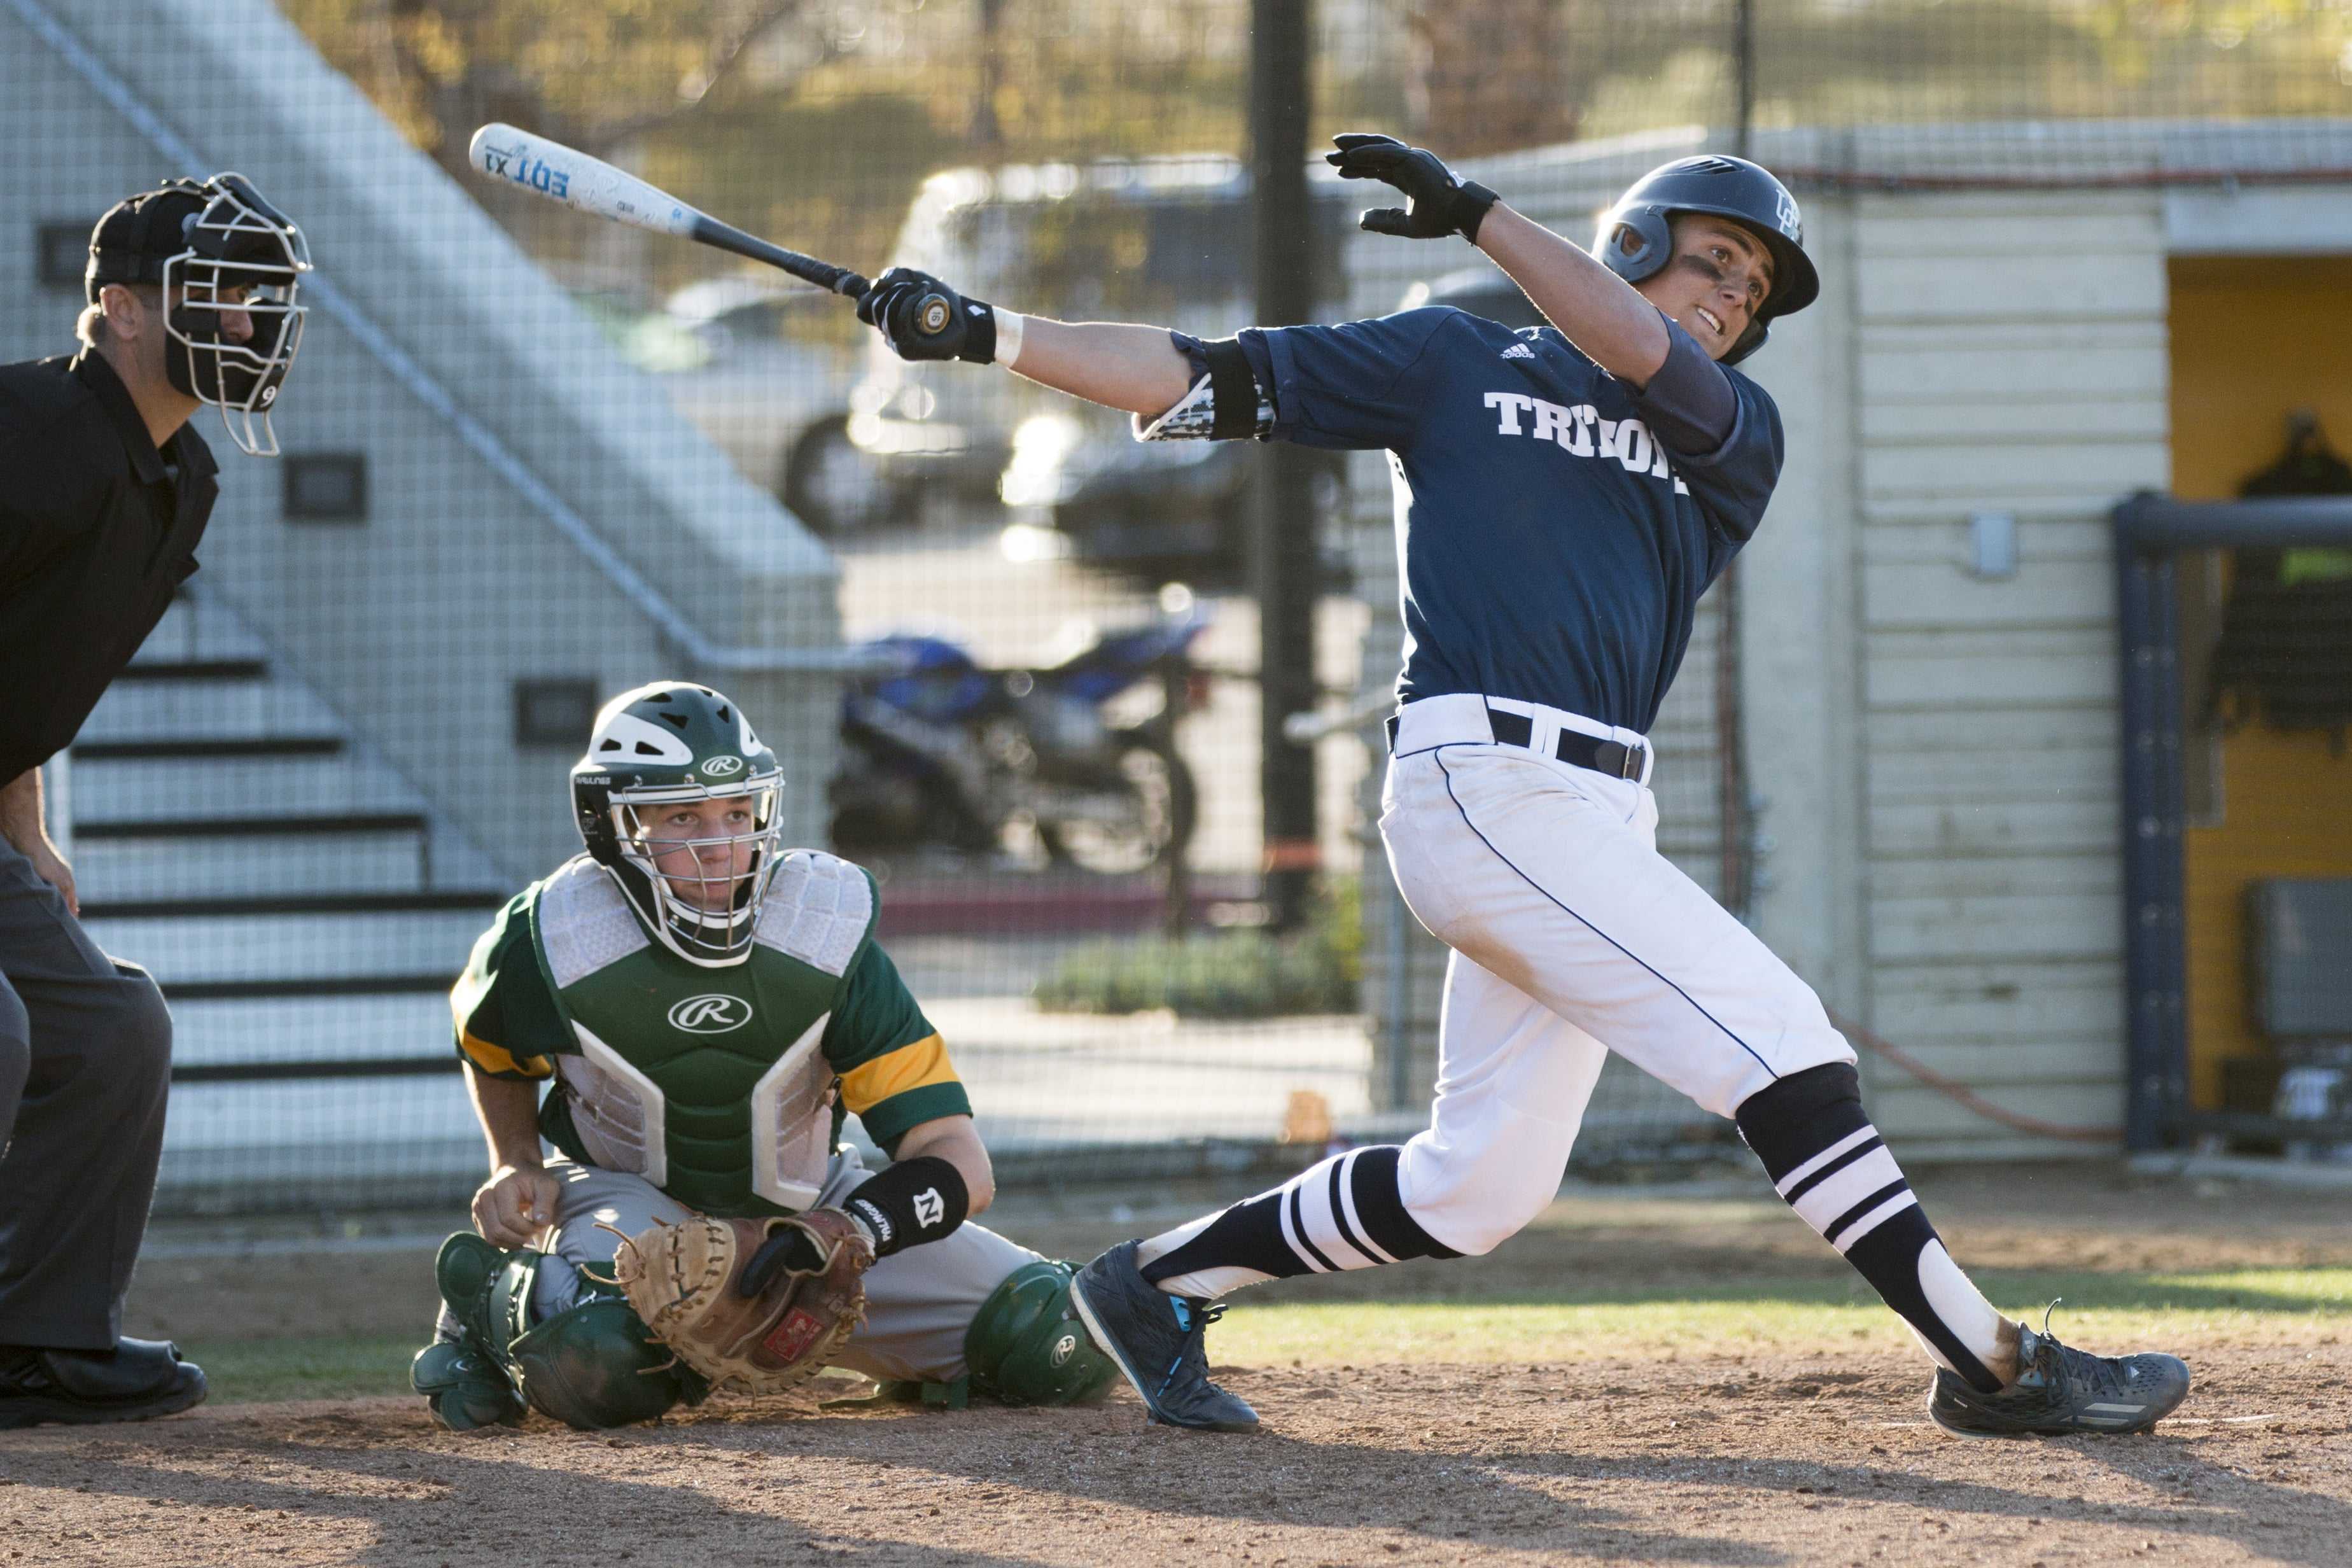 UCSD Baseball Finishes The Season In An CCAA Tournament Loss - UCSD